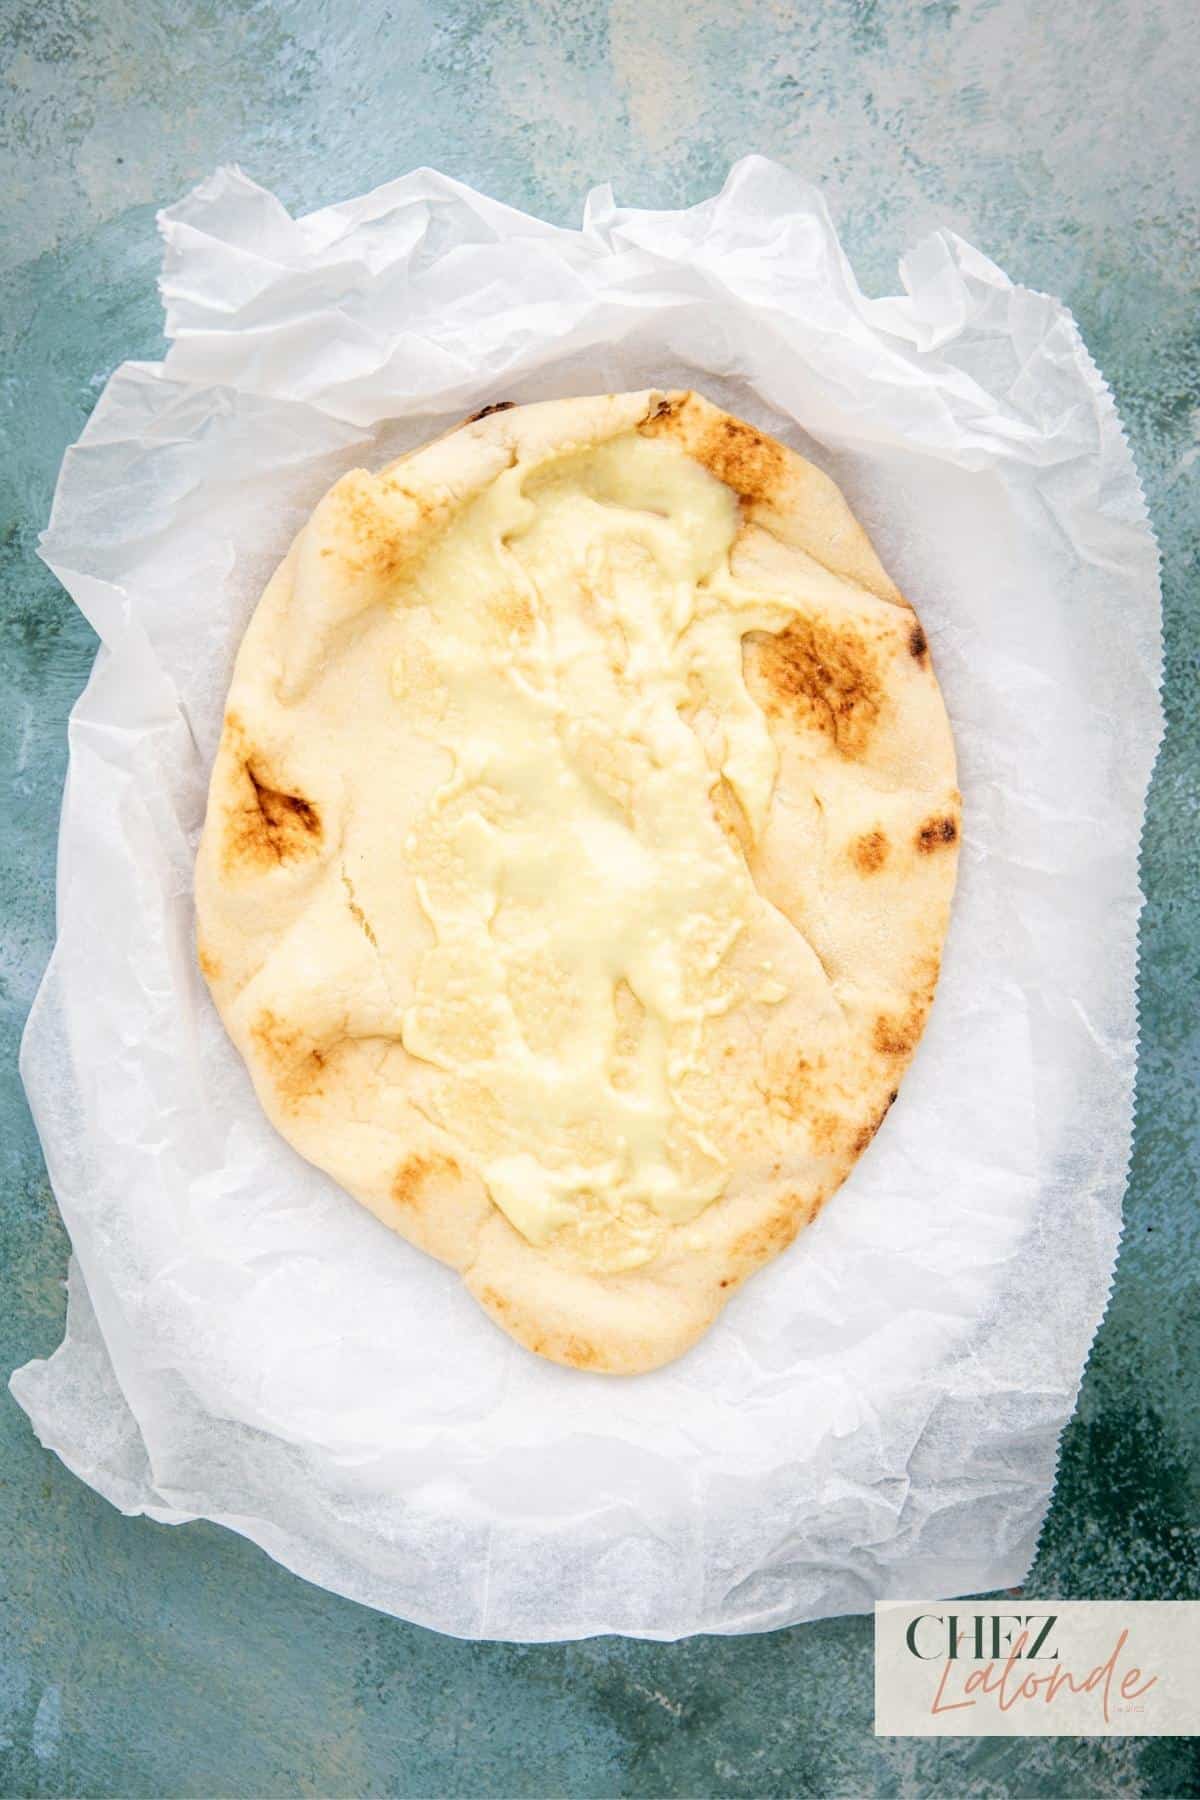 Start with a warm, soft flatbread like Naan, pita bread, or lavash. Spread some Middle Eastern garlic sauce in the middle .
